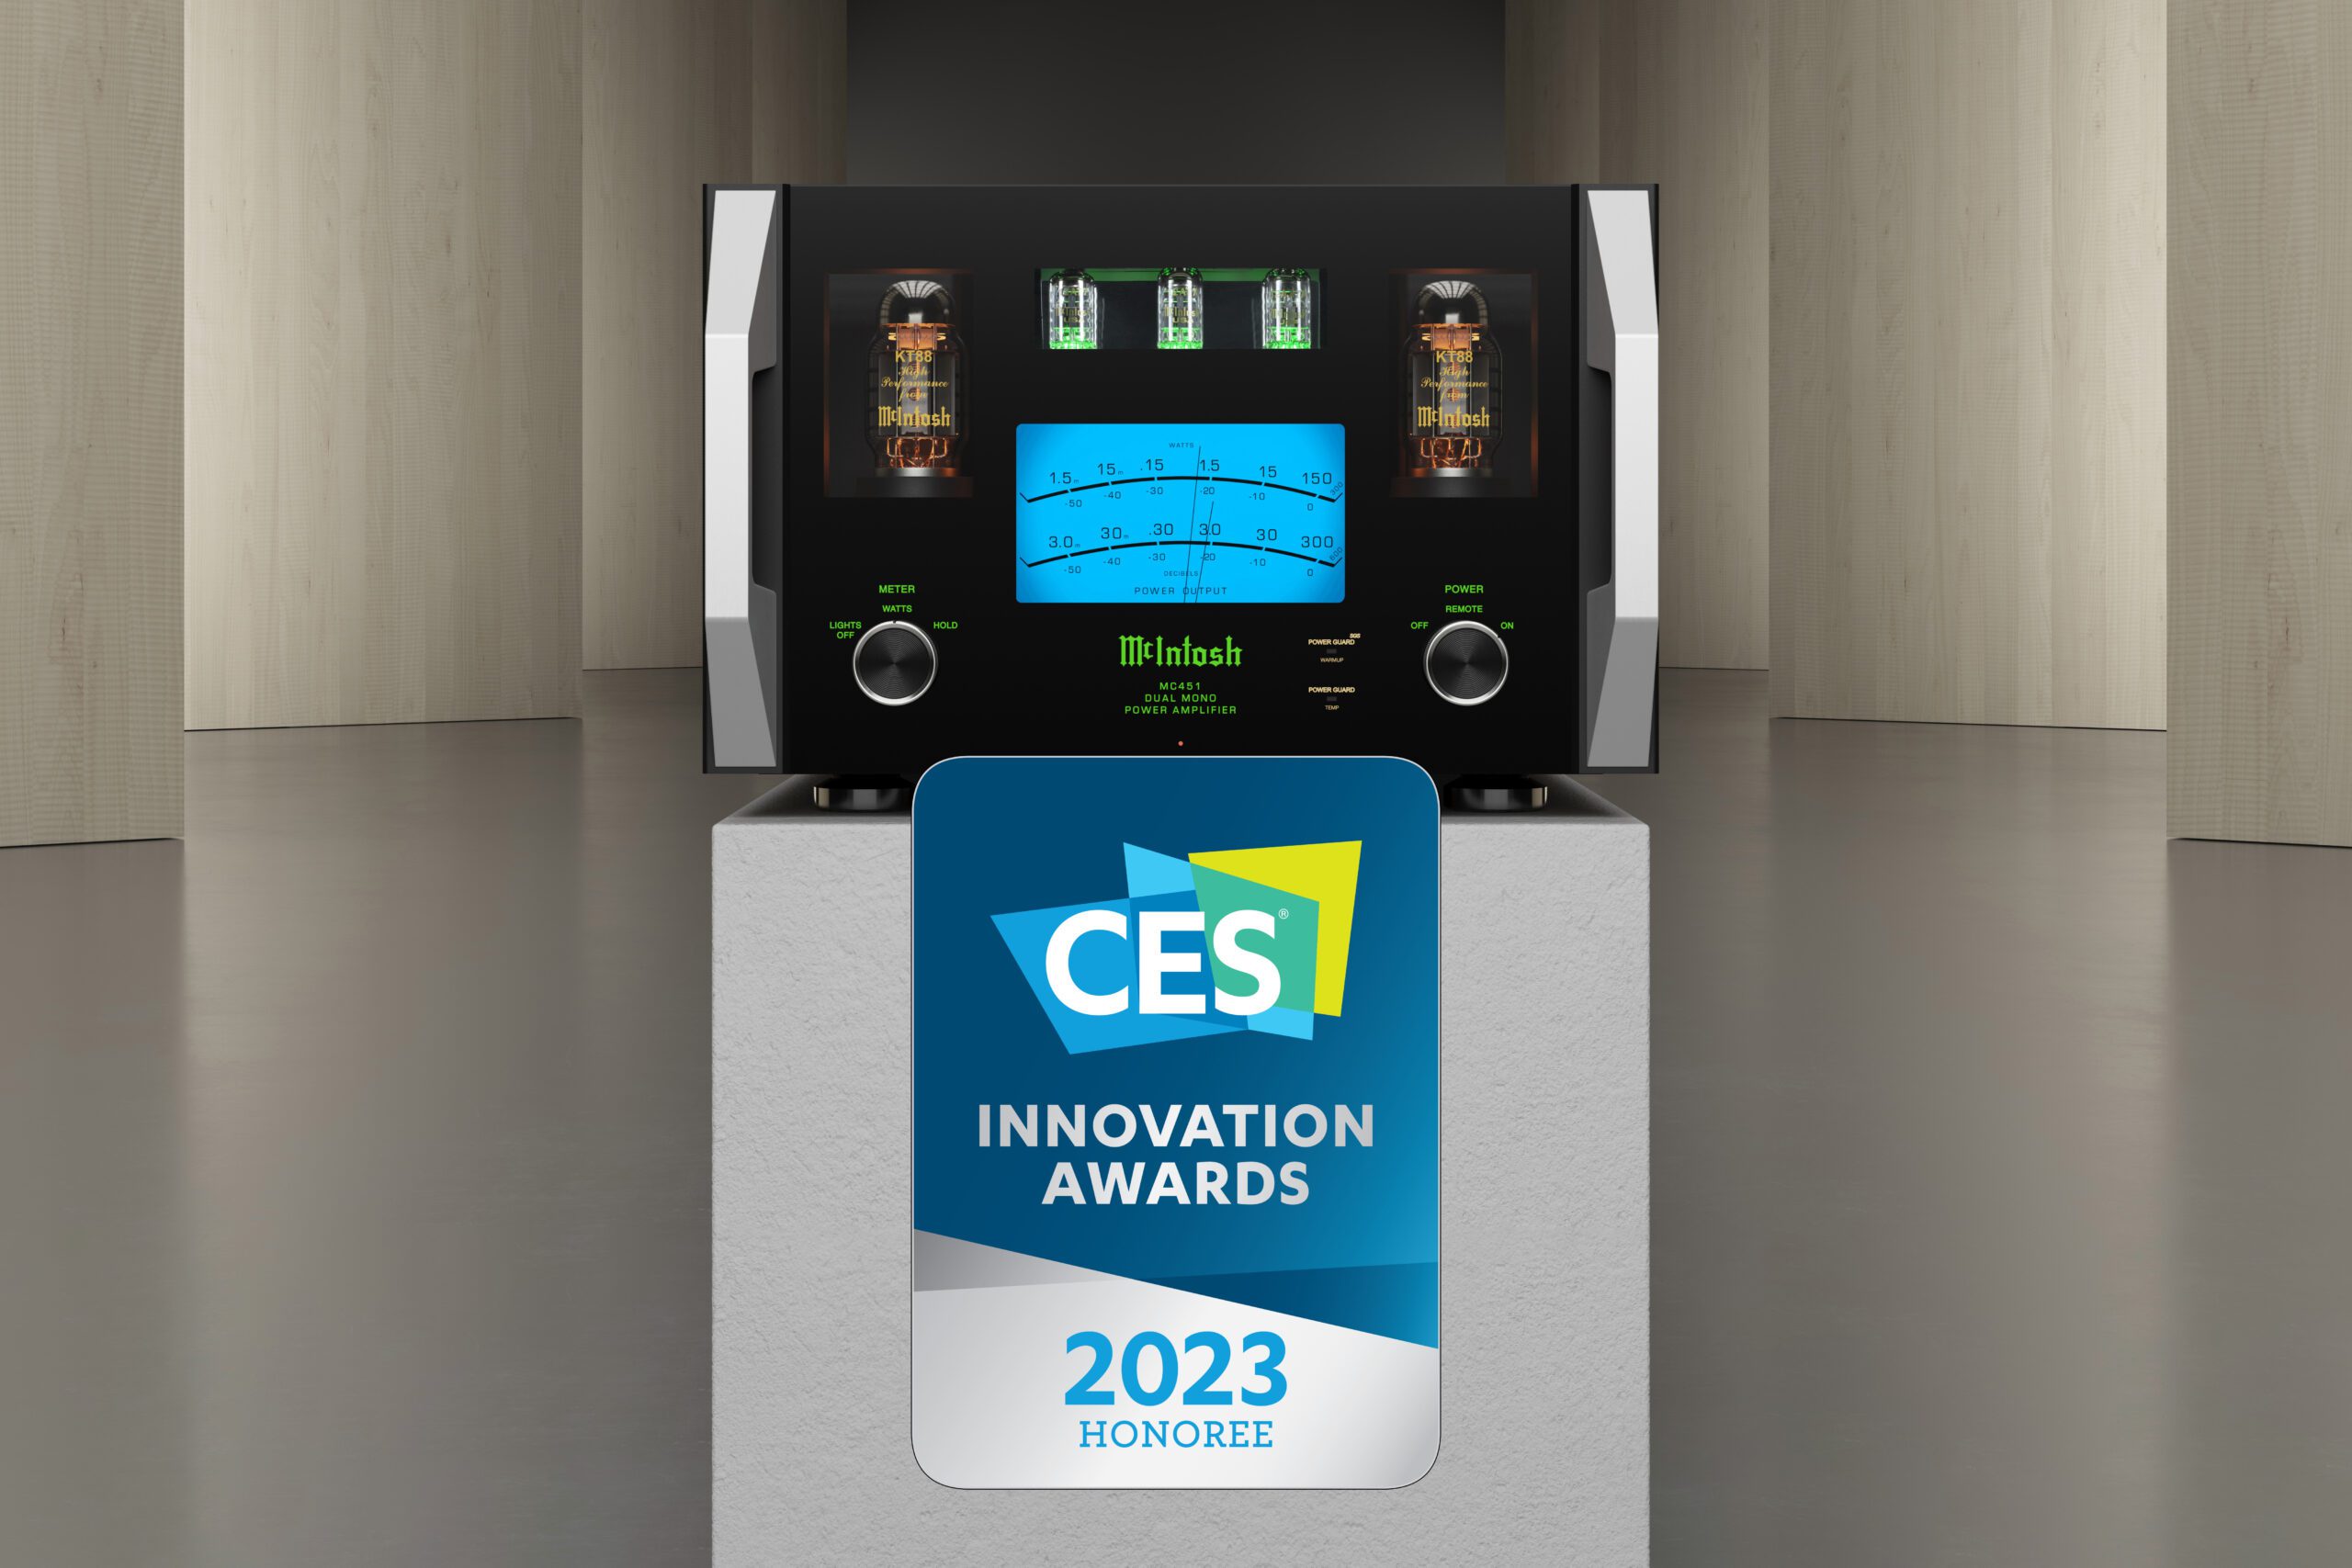 McIntosh MC45 is a CES Innovation Awards 2023 honoree